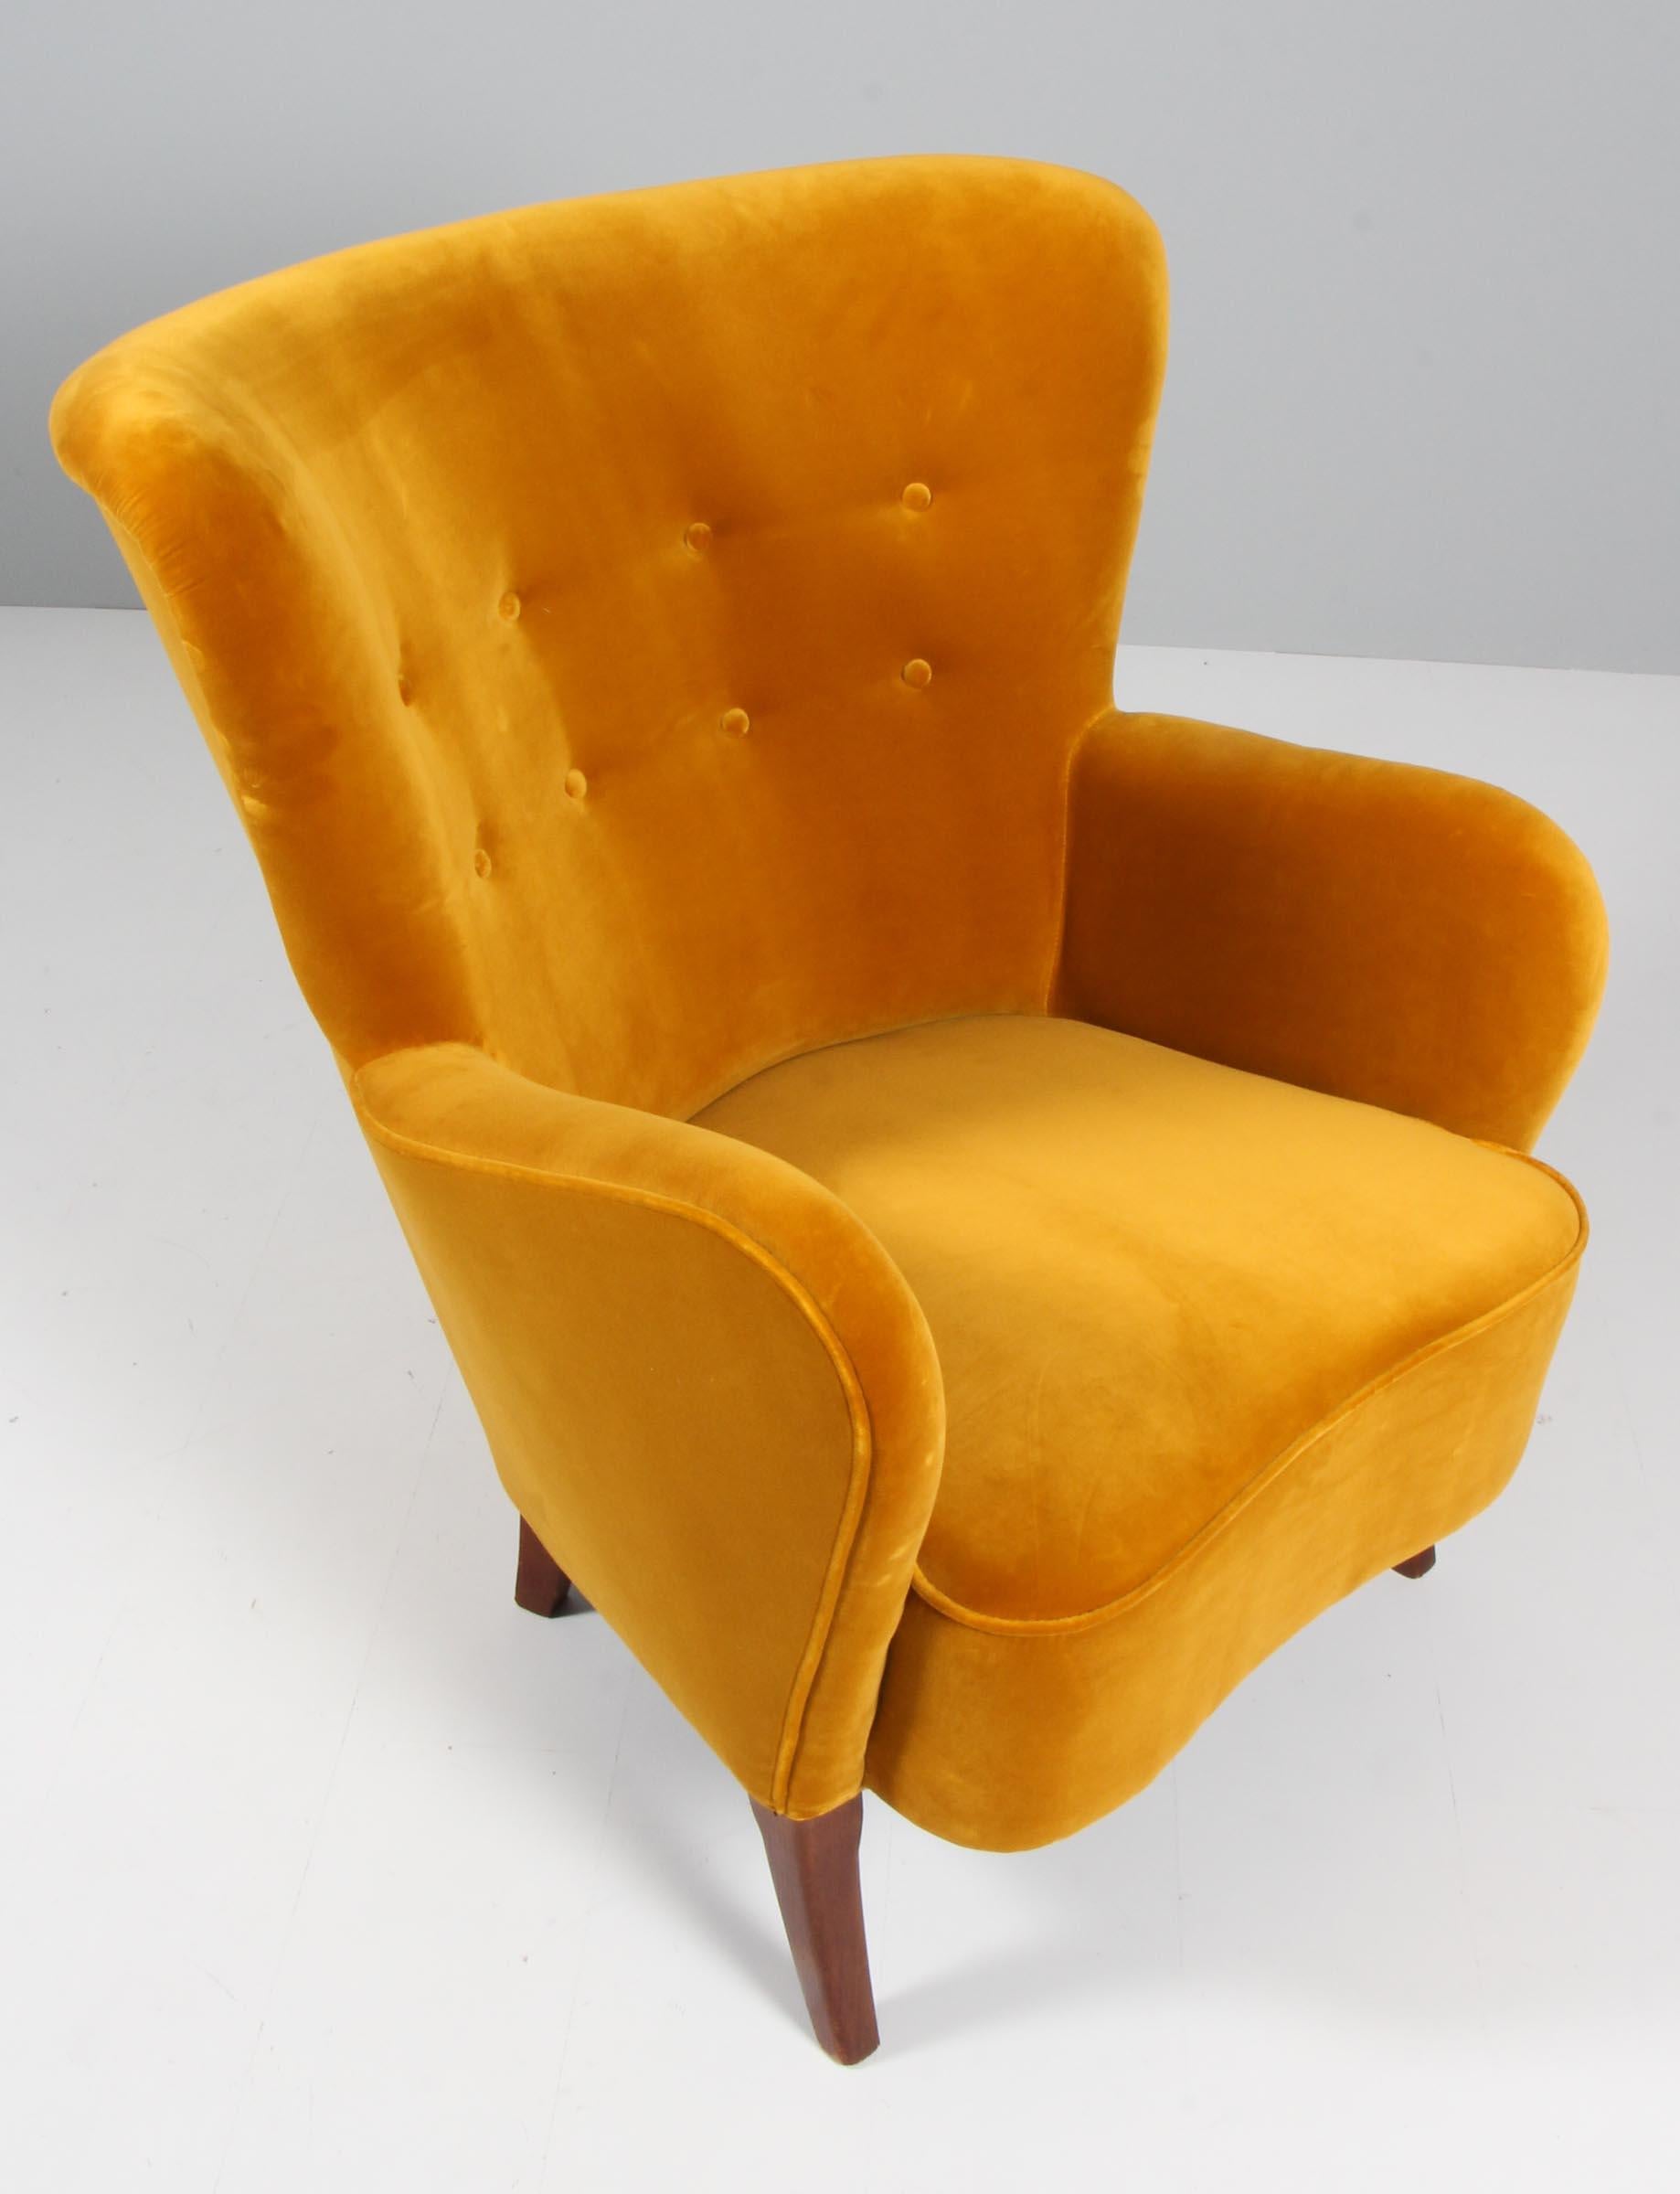 Alfred Christensen lounge chair new upholstered with velvet.

Legs of stained beech.

Made in the 1940s by Slagelse Møbelværk.

